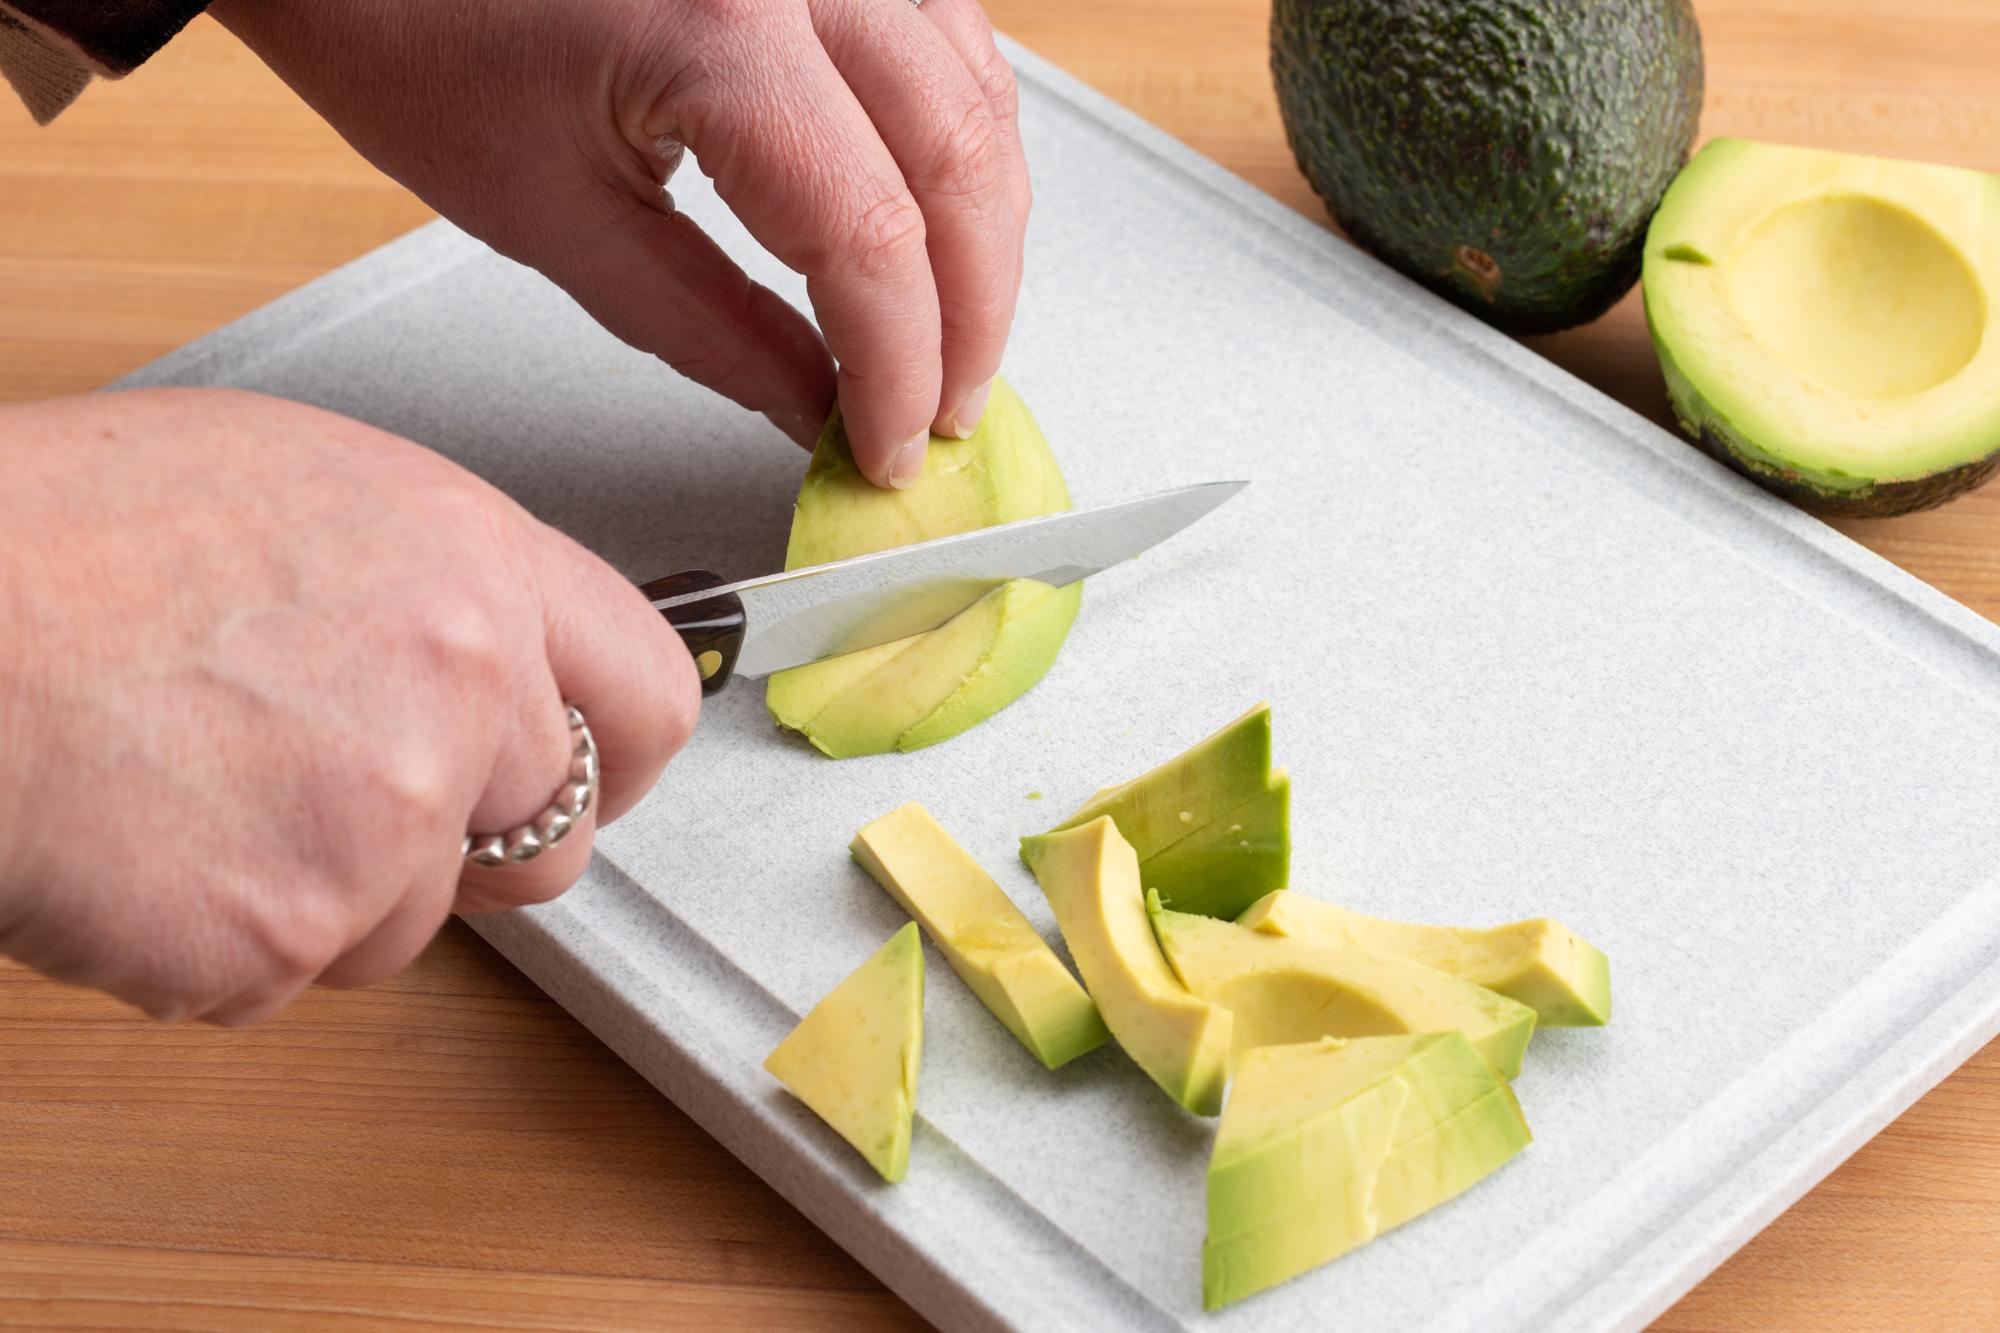 Slicing the avocado with a 4 Inch Gourmet Paring Knife